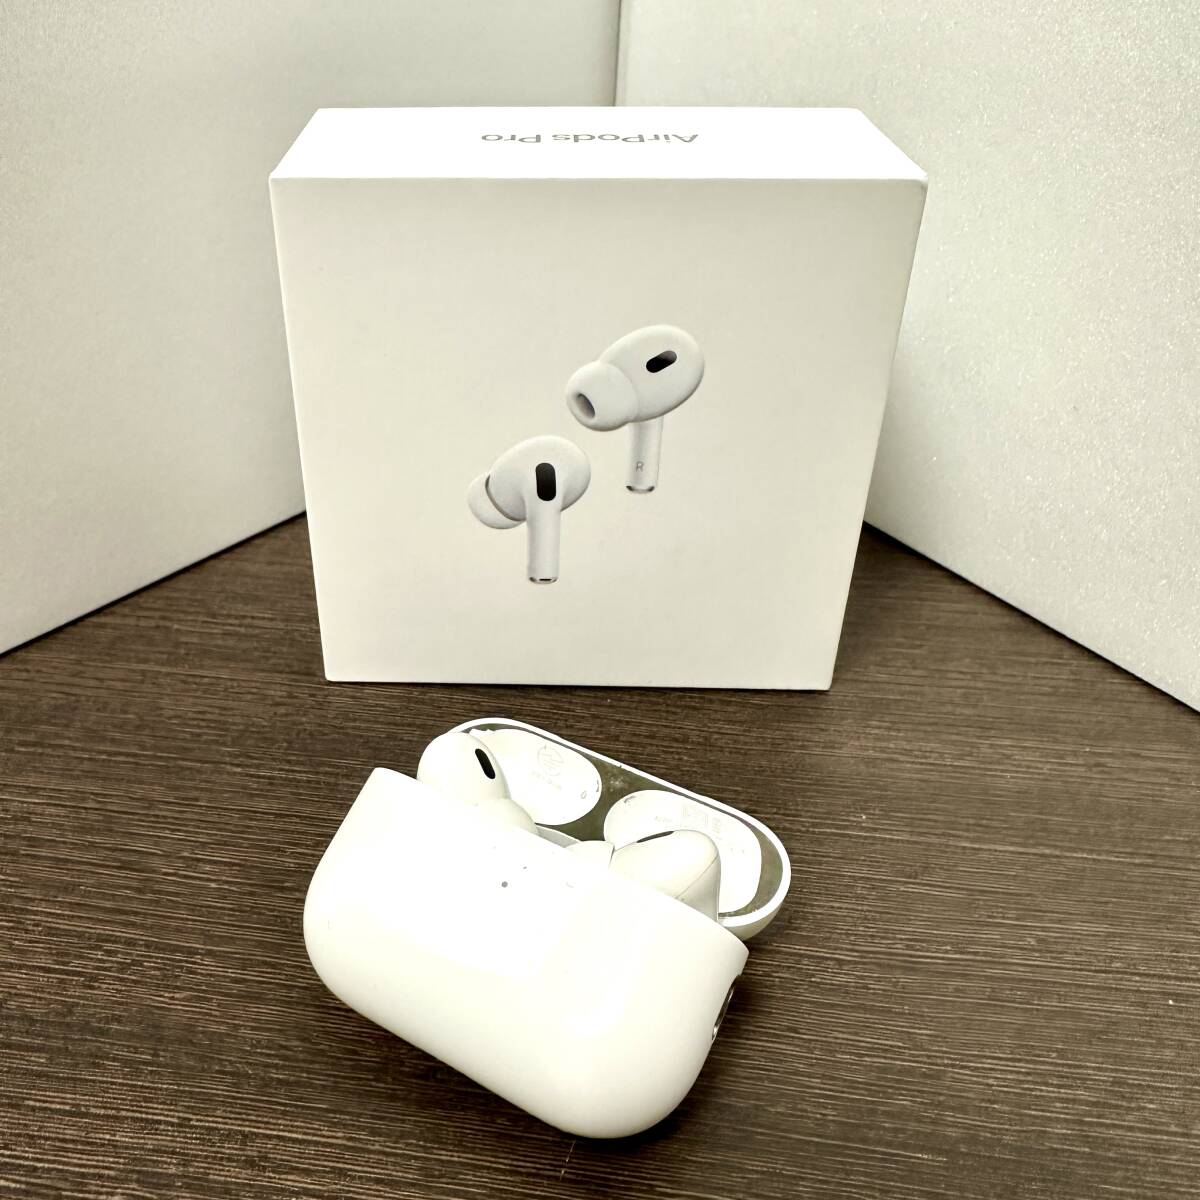 ☆★H1587【送料込み】Apple AirPods Pro MQD83J/A A2700 A2698 A2699 第2世代 AirPods Pro MagSafe 充電ケース ケーブル・箱付きの画像1